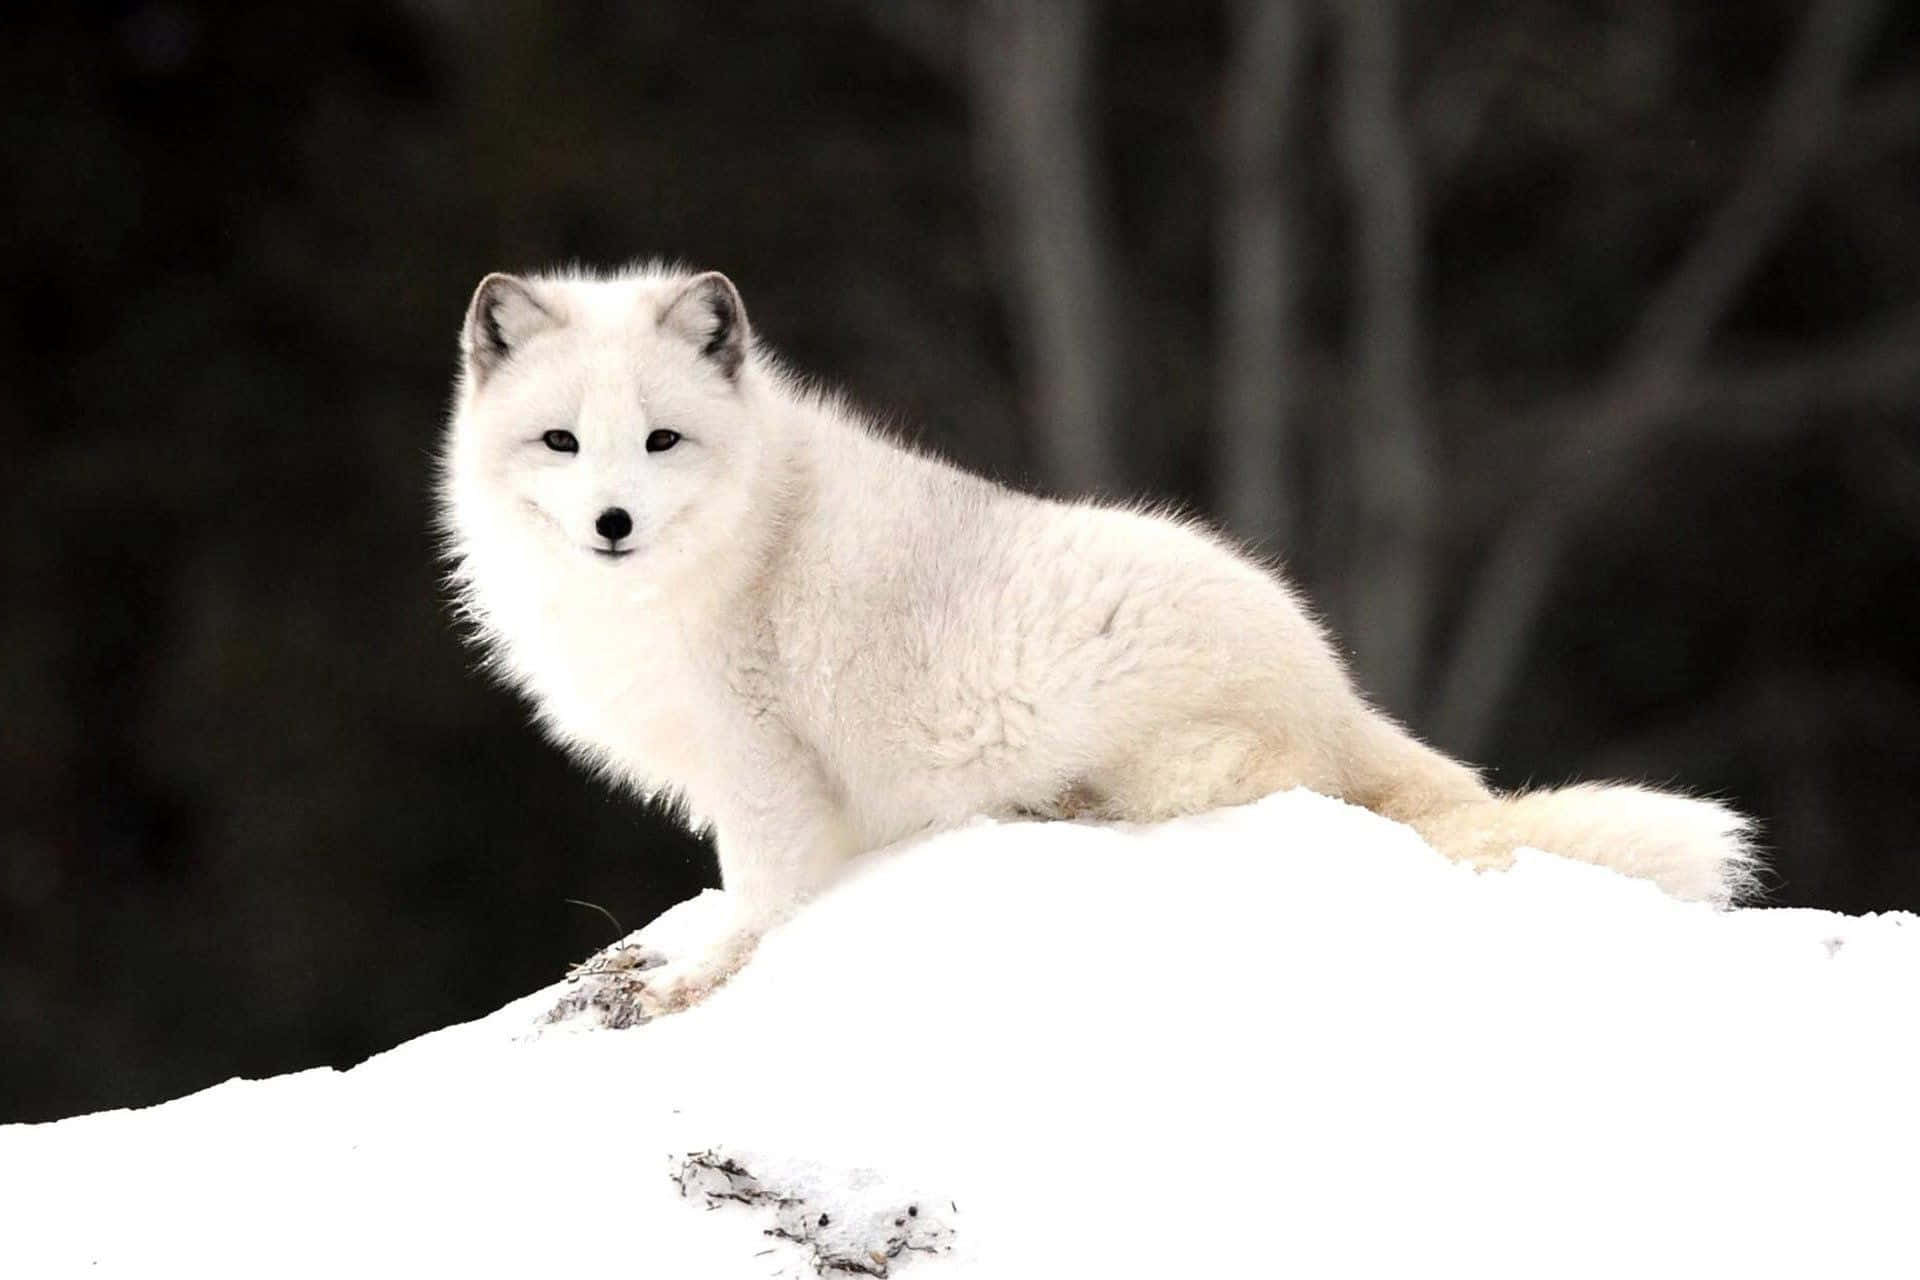 "An adorable Arctic fox enjoying the beauty of its cold and vast home".